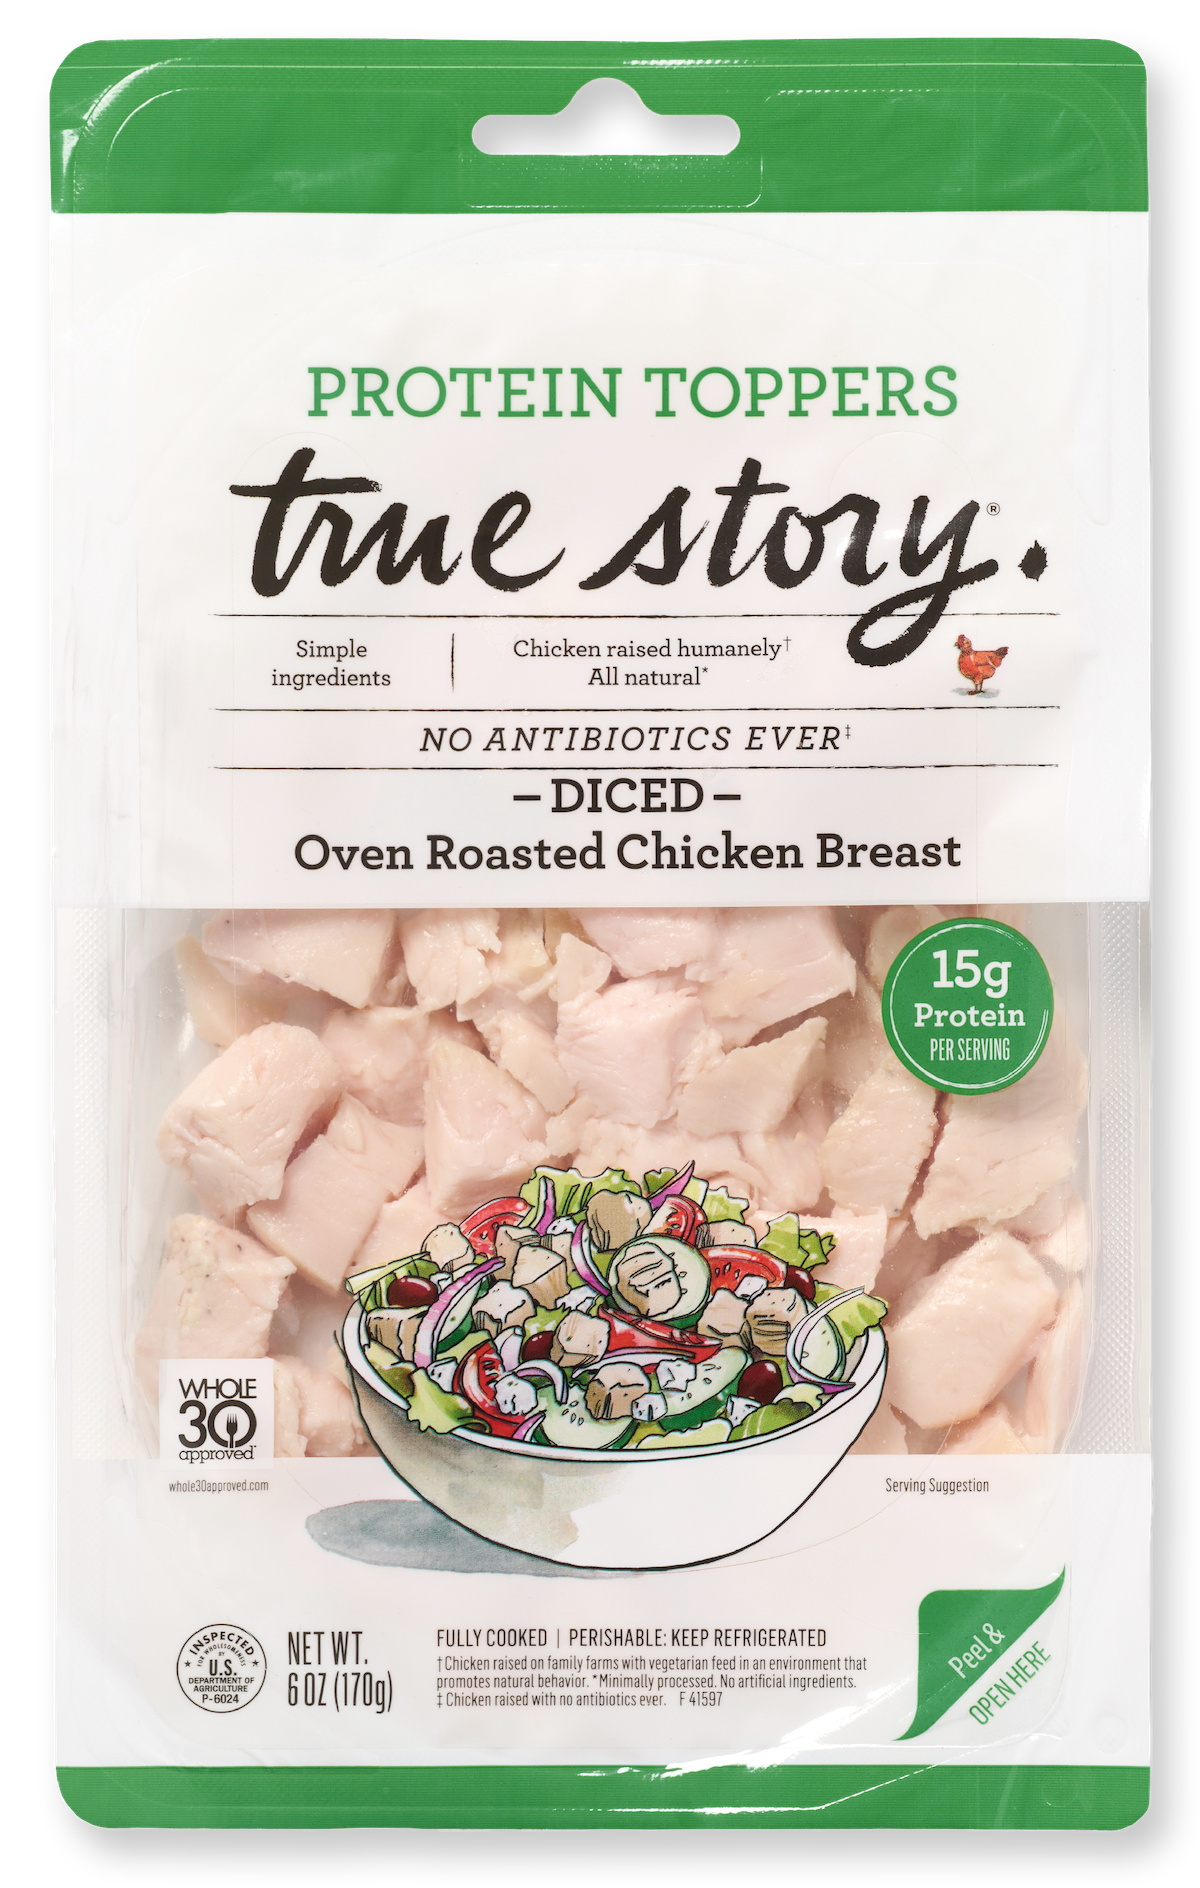 Protein Toppers Oven Roasted Chicken Breast Product Packaging